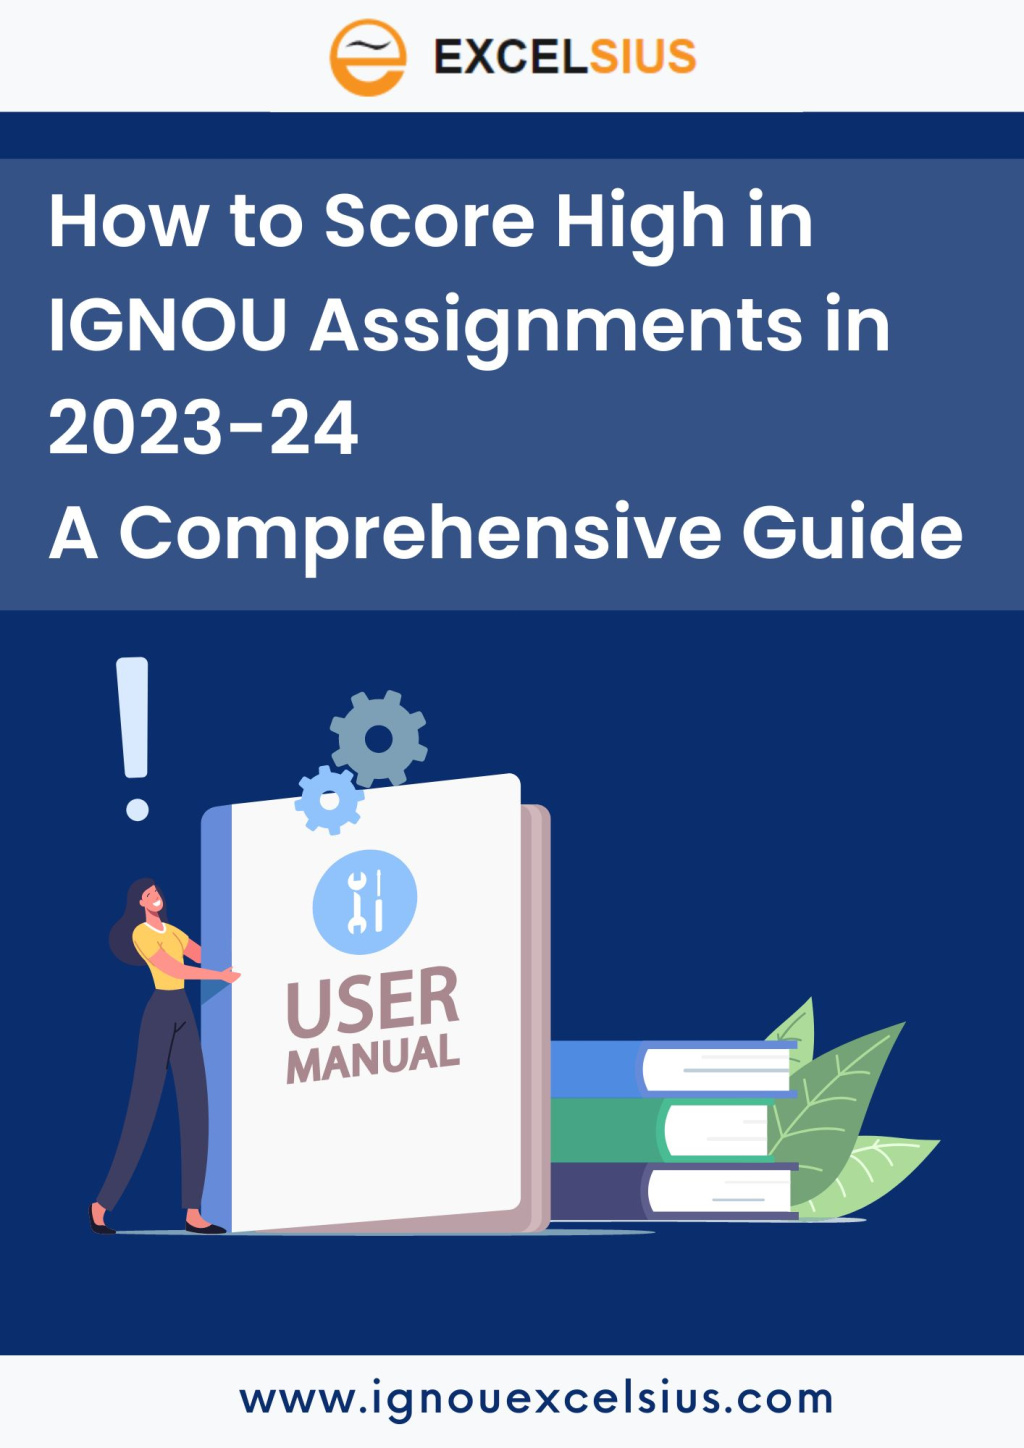 How to Score High in IGNOU Solved Assignments in 2023-24: A Comprehensive Guide